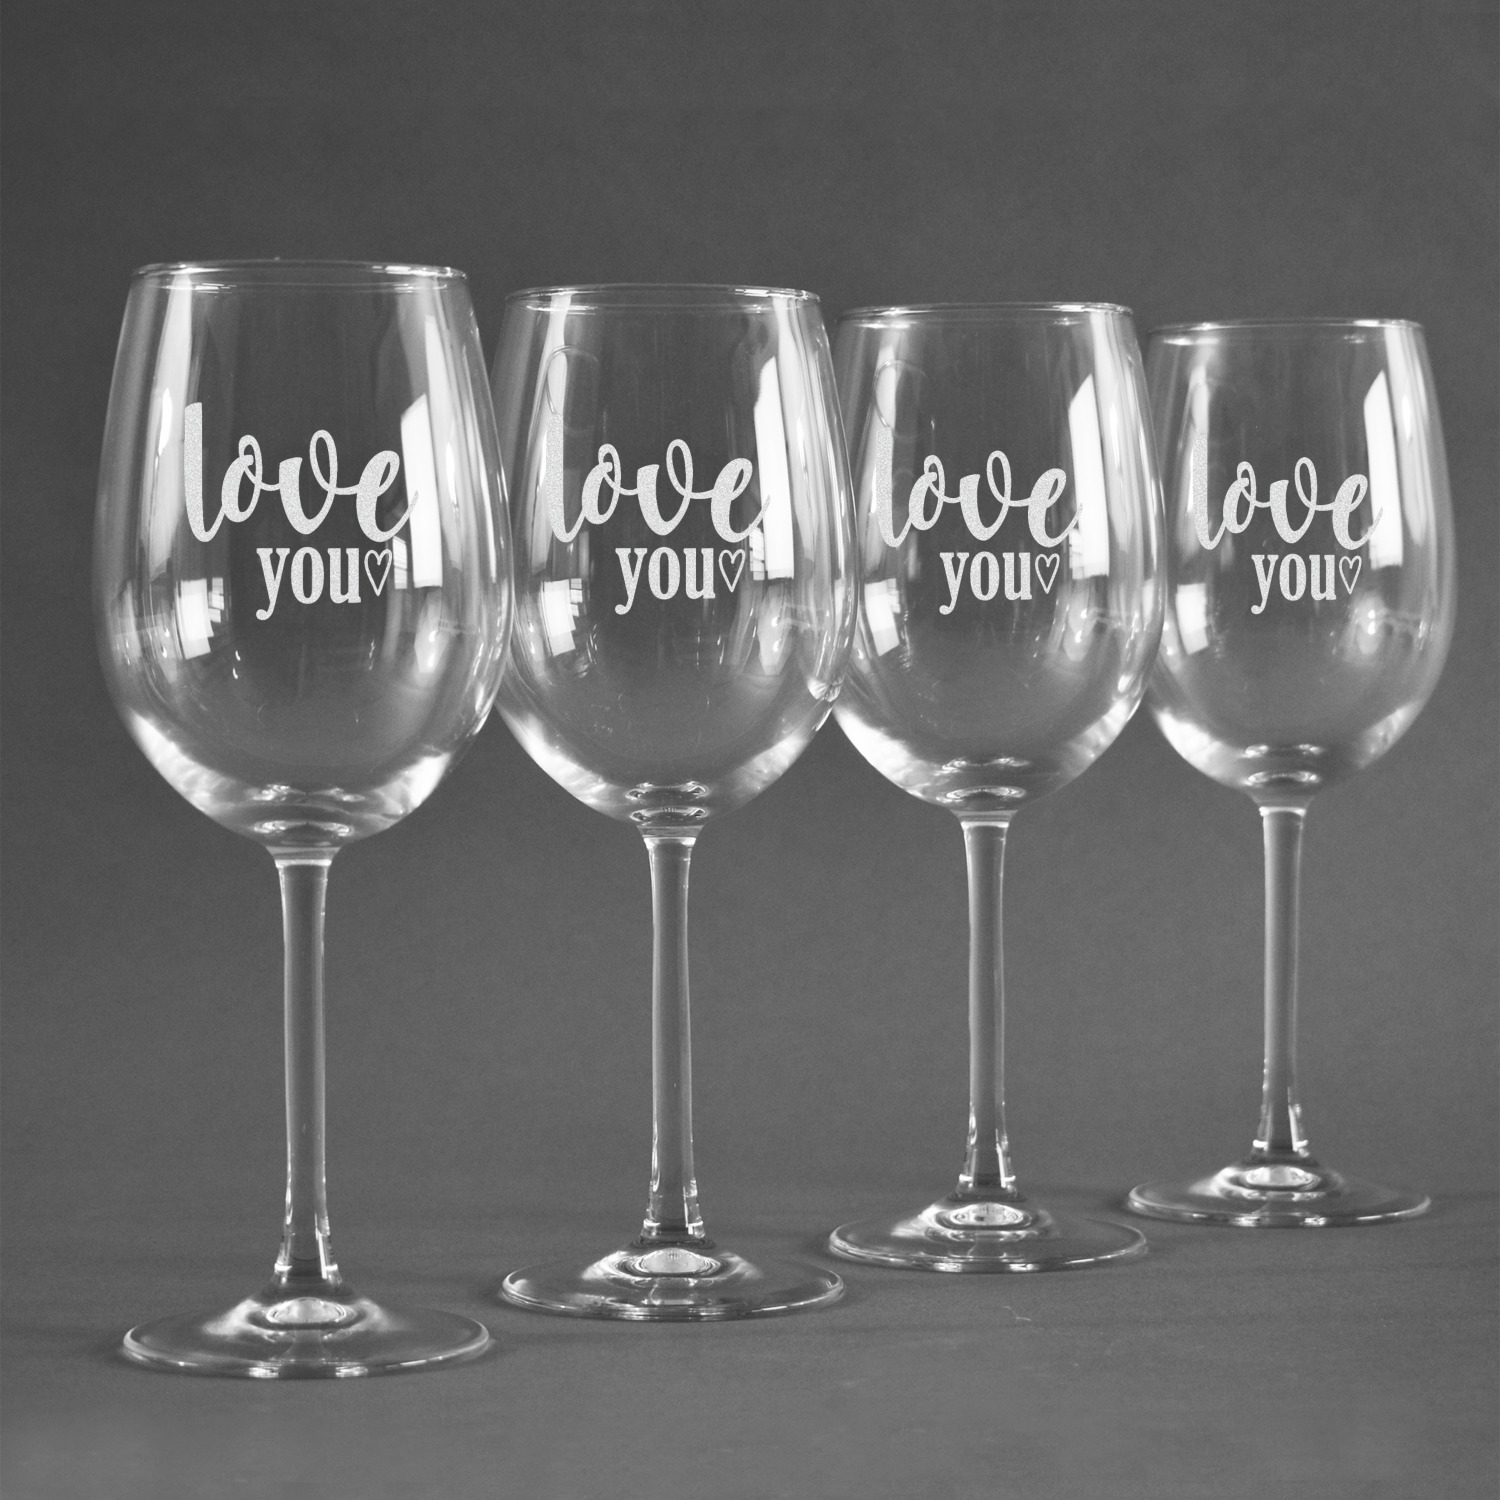 Personal Creations Wine Glasses - Personalized Giant Wine Glass